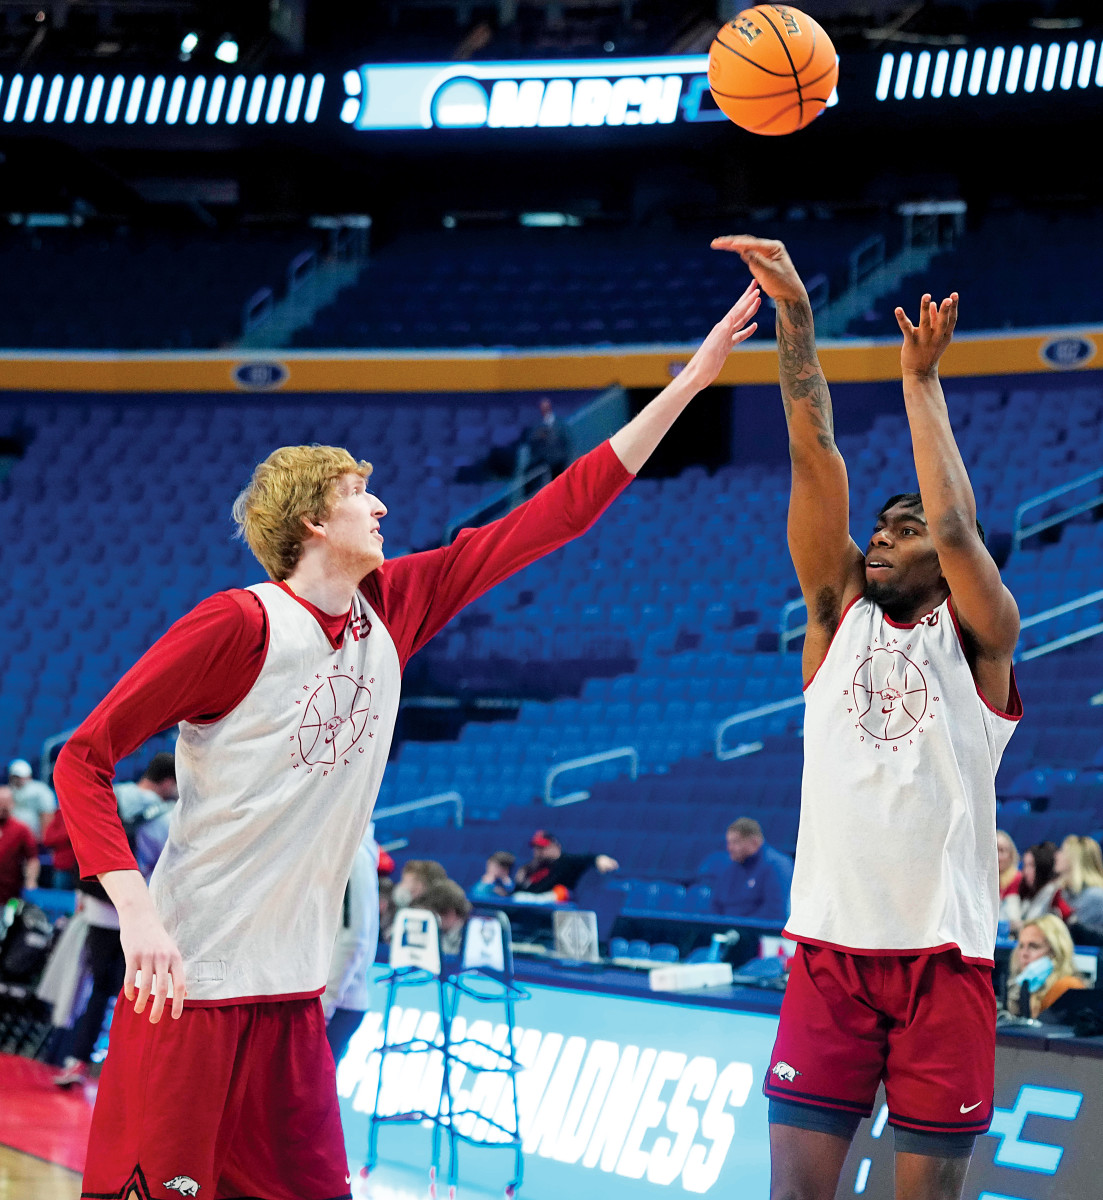 Razorbacks forward Kamani Johnson (20) shoots the ball with forward Connor Vanover (23) defending during practice before the first round of the 2022 NCAA Tournament at KeyBank Center.